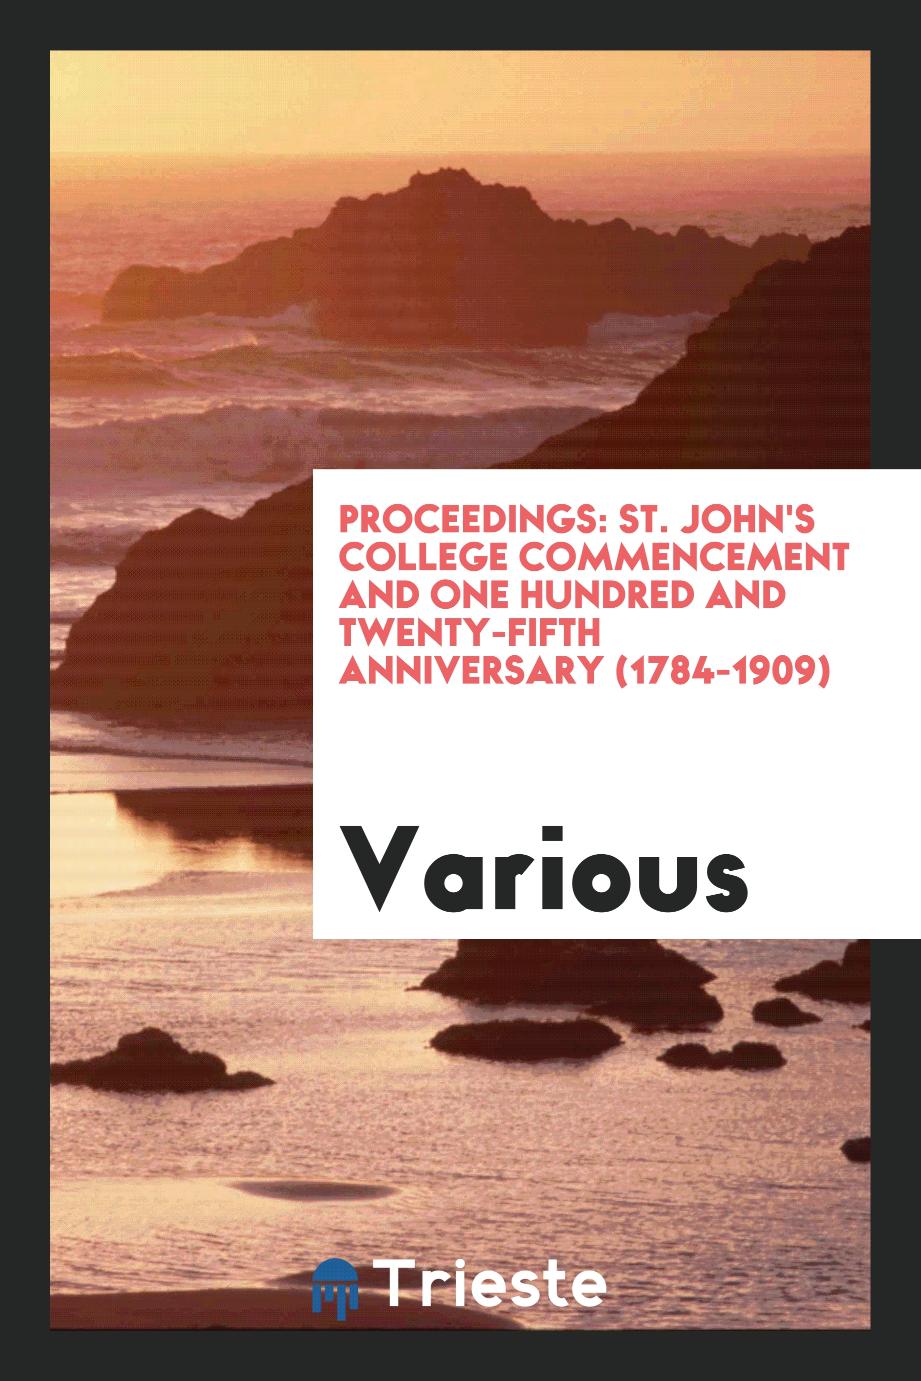 Proceedings: St. John's college commencement and one hundred and twenty-fifth anniversary (1784-1909)